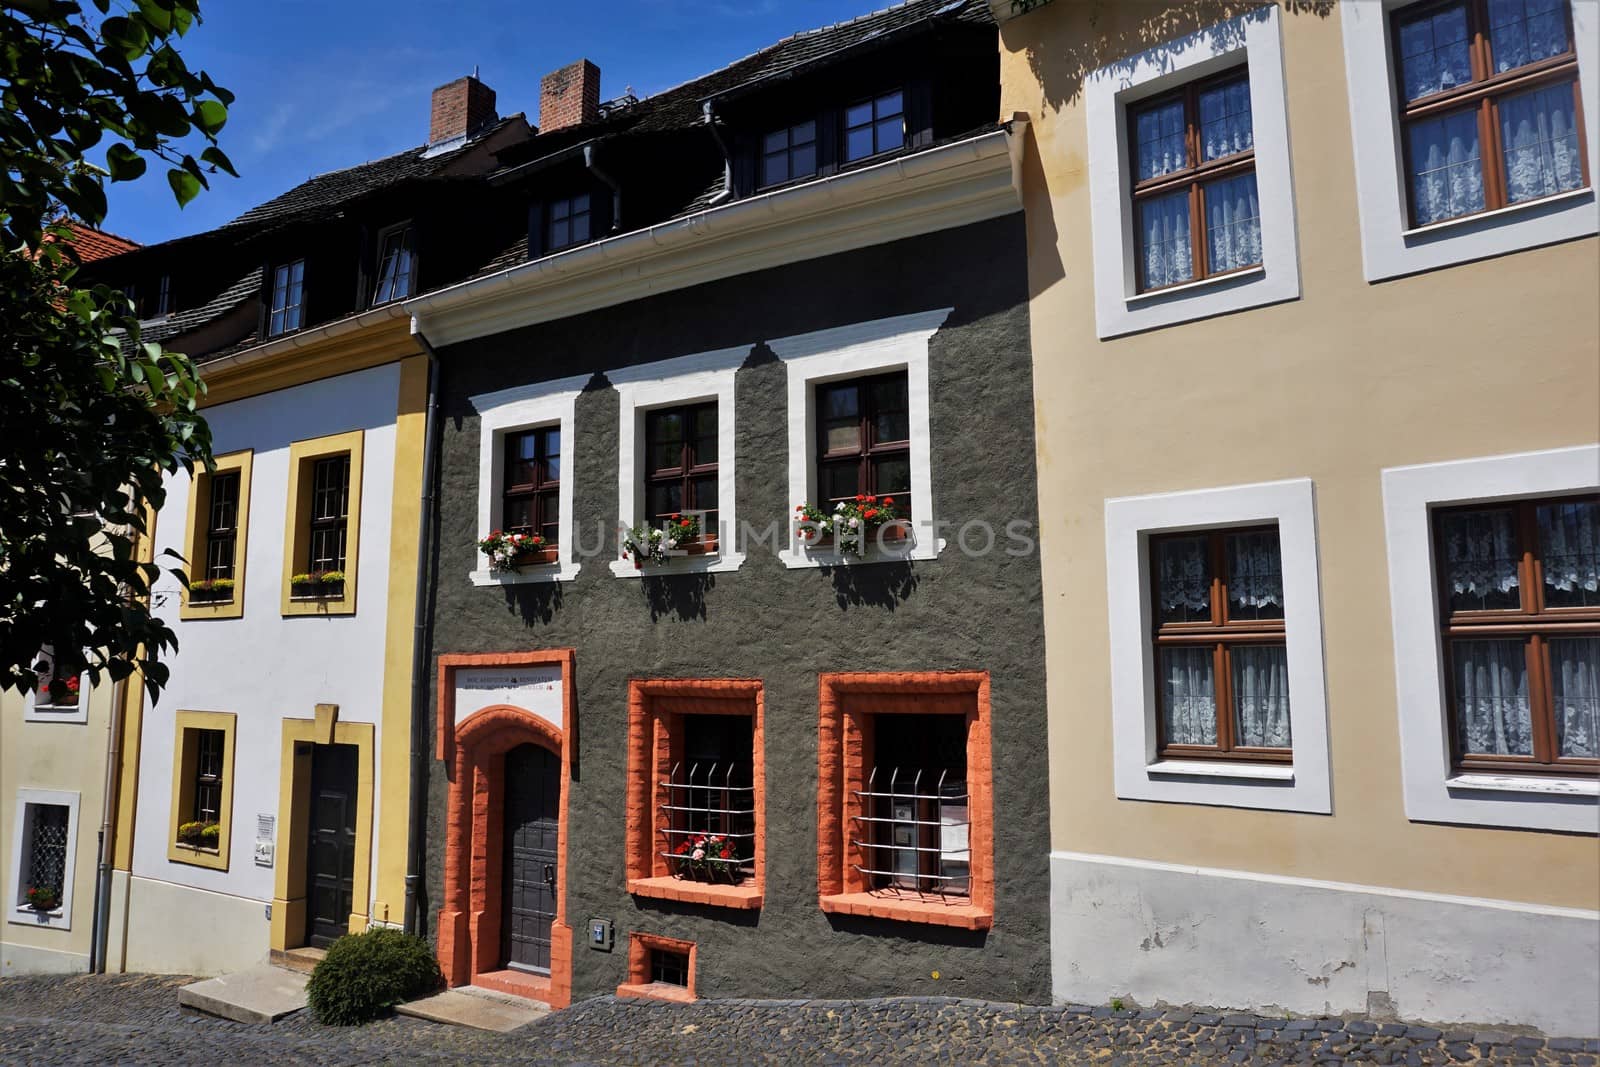 Picturesque row of houses spotted in the Karpfengrund street in Goerlitz, Germany